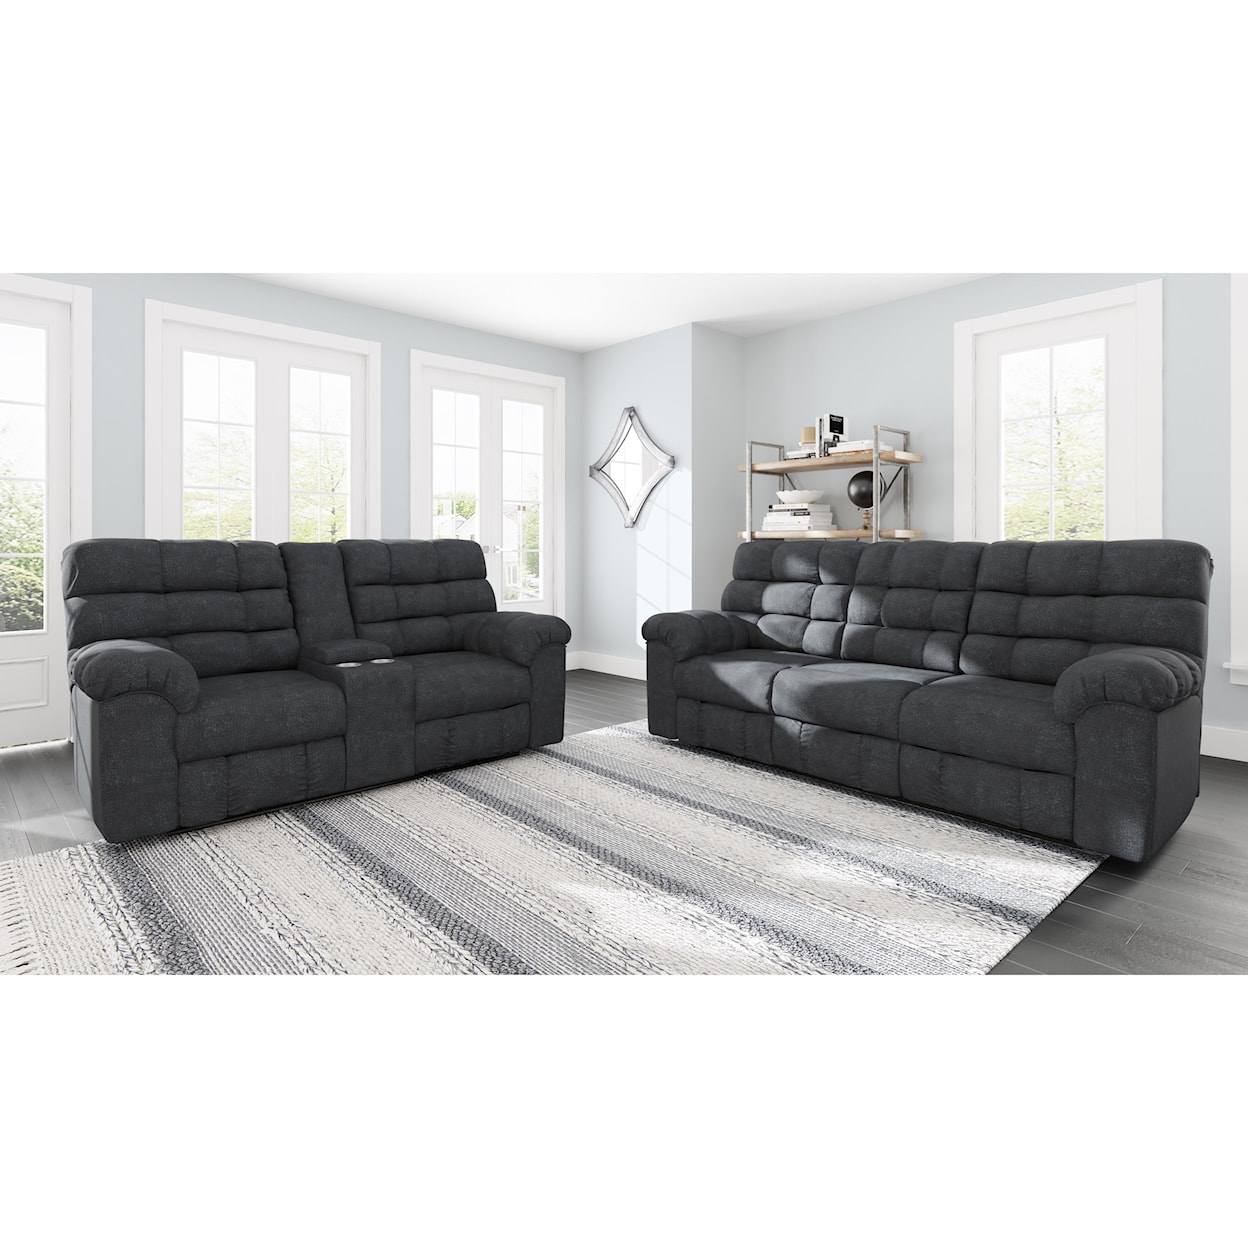 Signature Design by Ashley Wilhurst Reclining Living Room Group